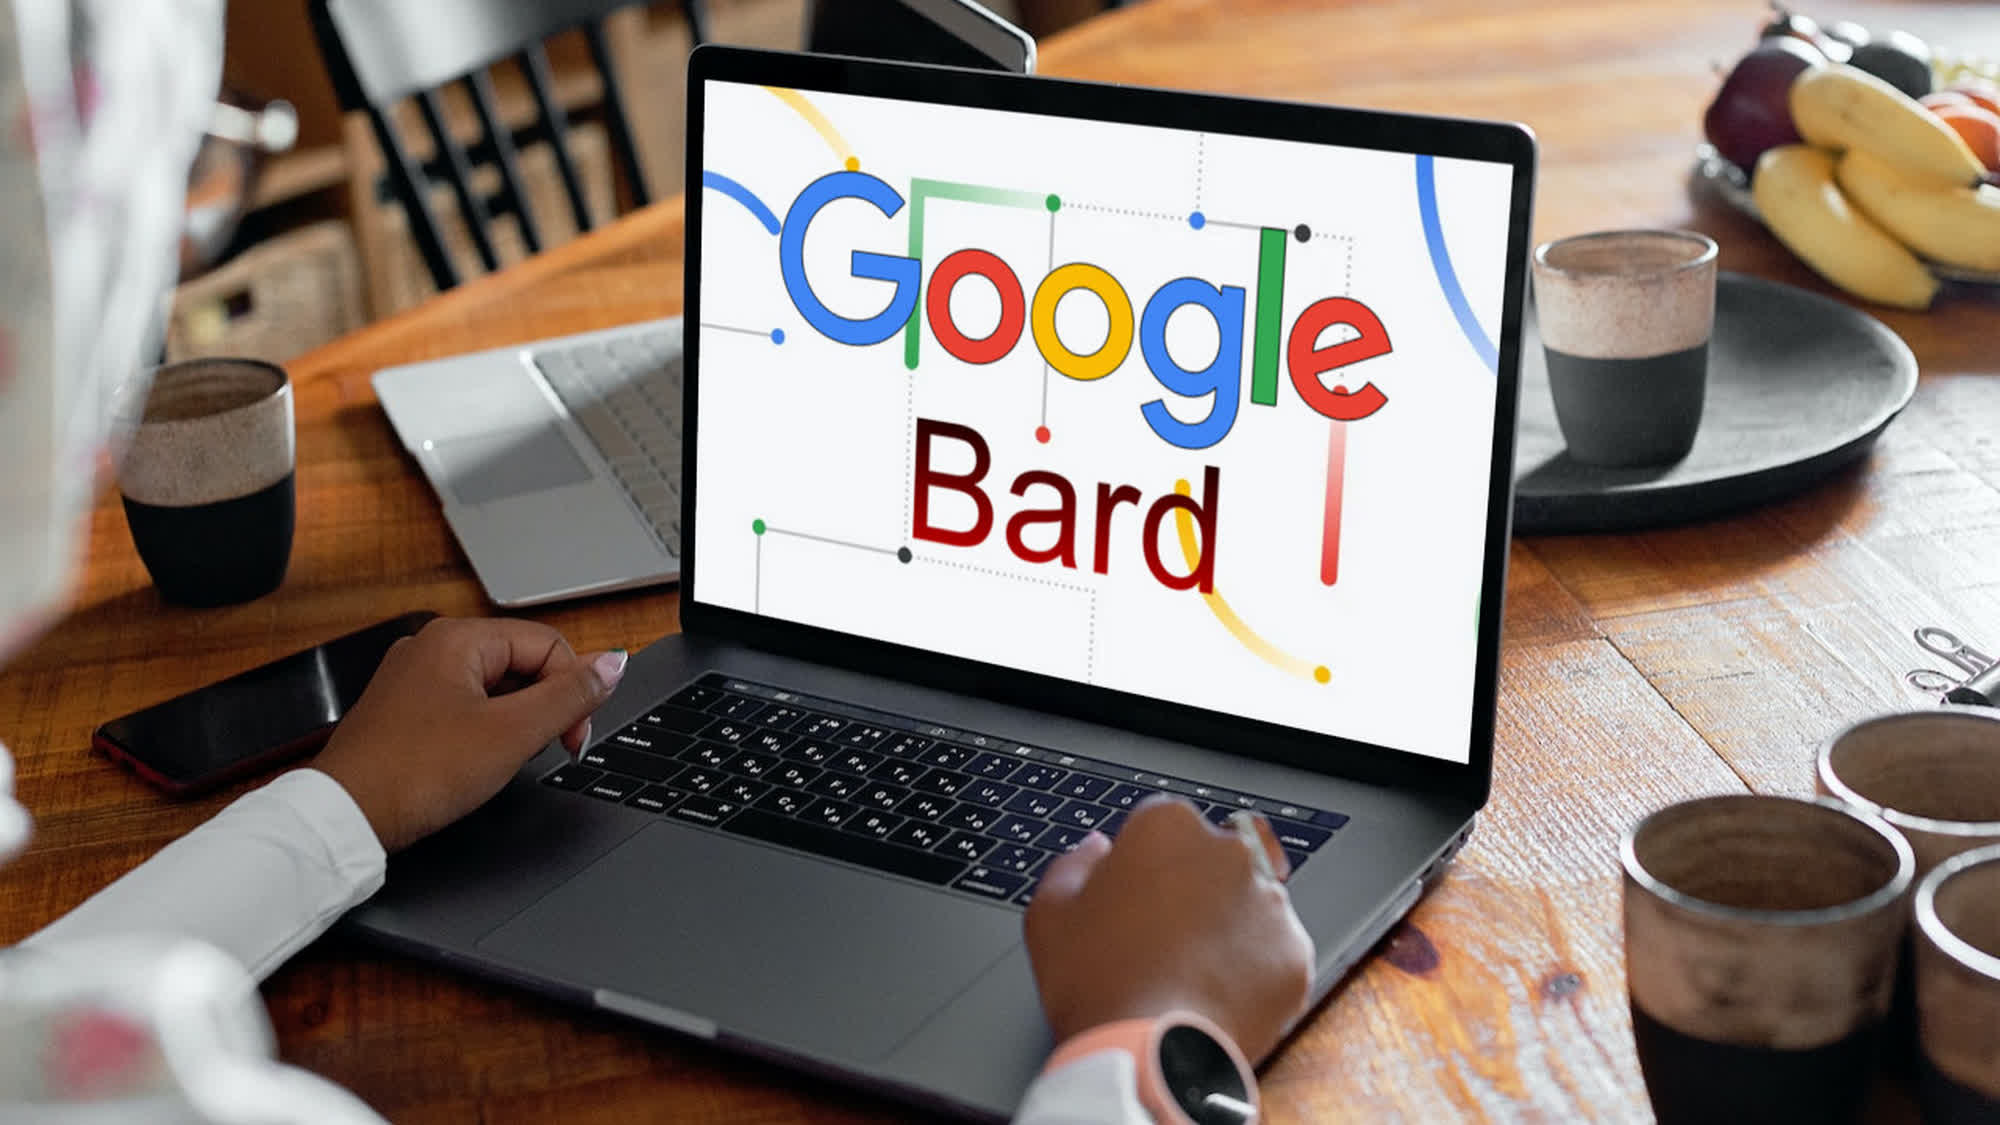 Google's ChatGPT rival 'Bard' is now in early access